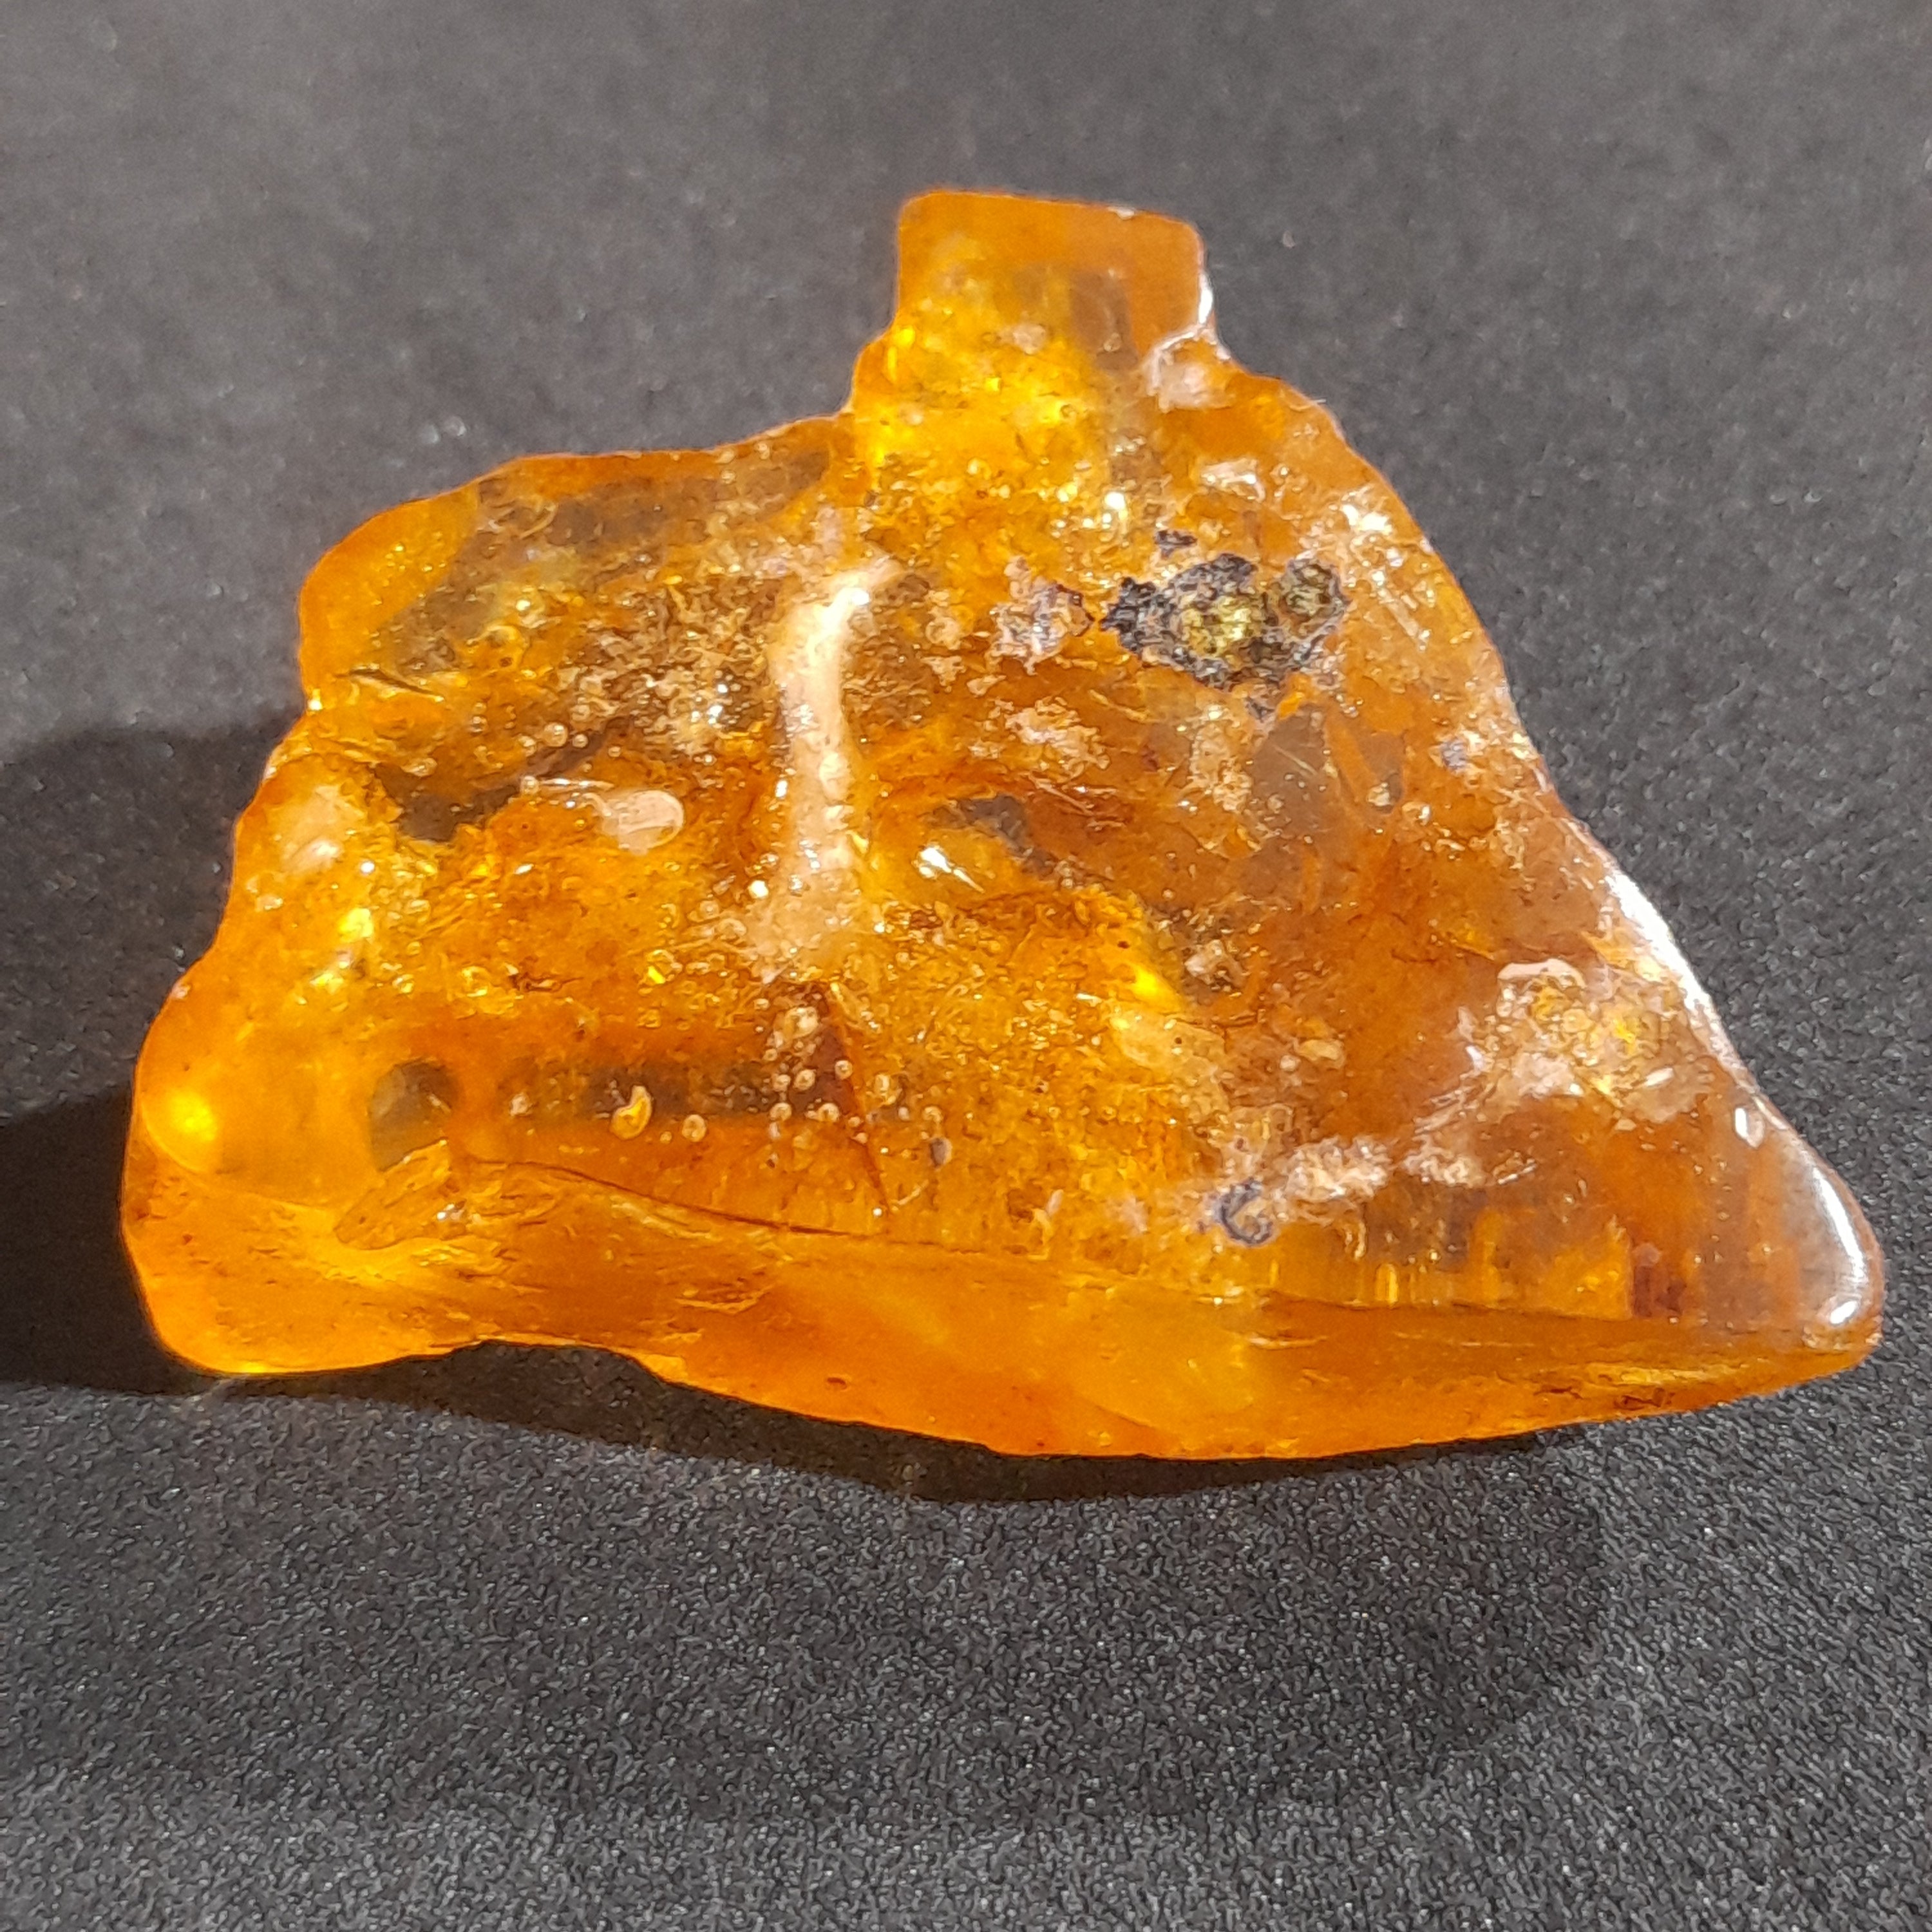 Copal/ Amber with insect and plant matter fossil inclusions